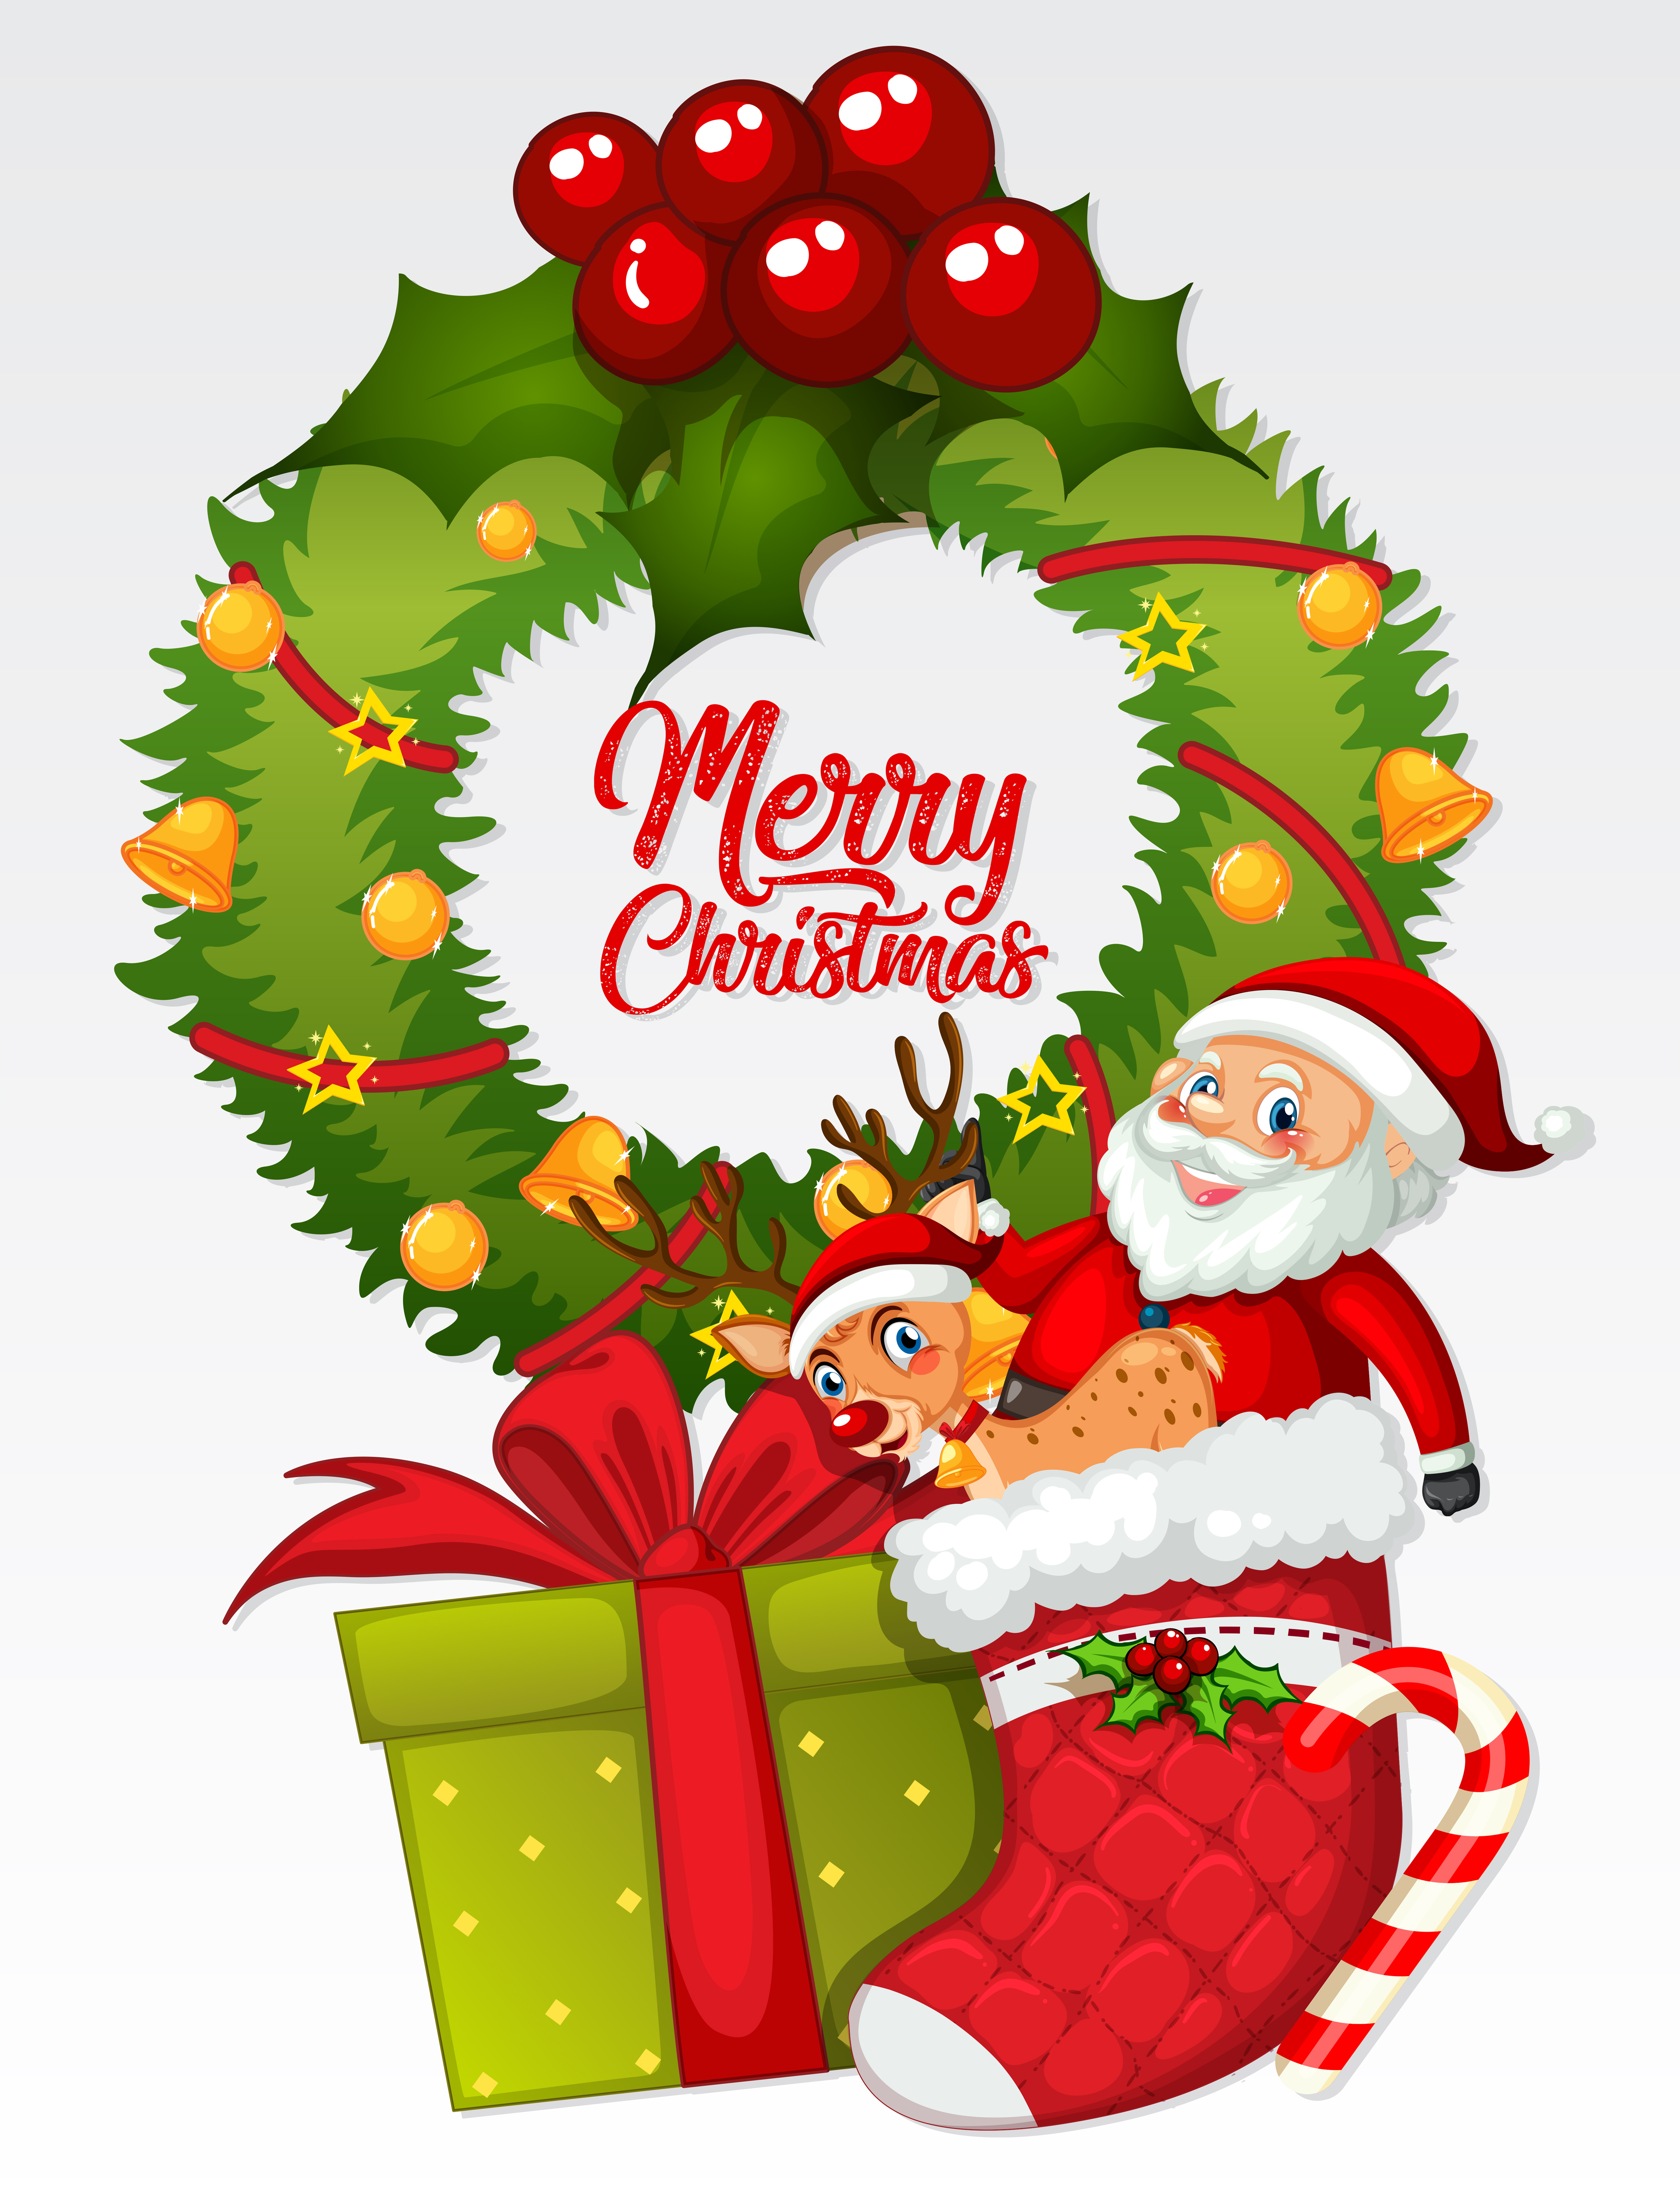 Merry christmas card template - Download Free Vectors ...